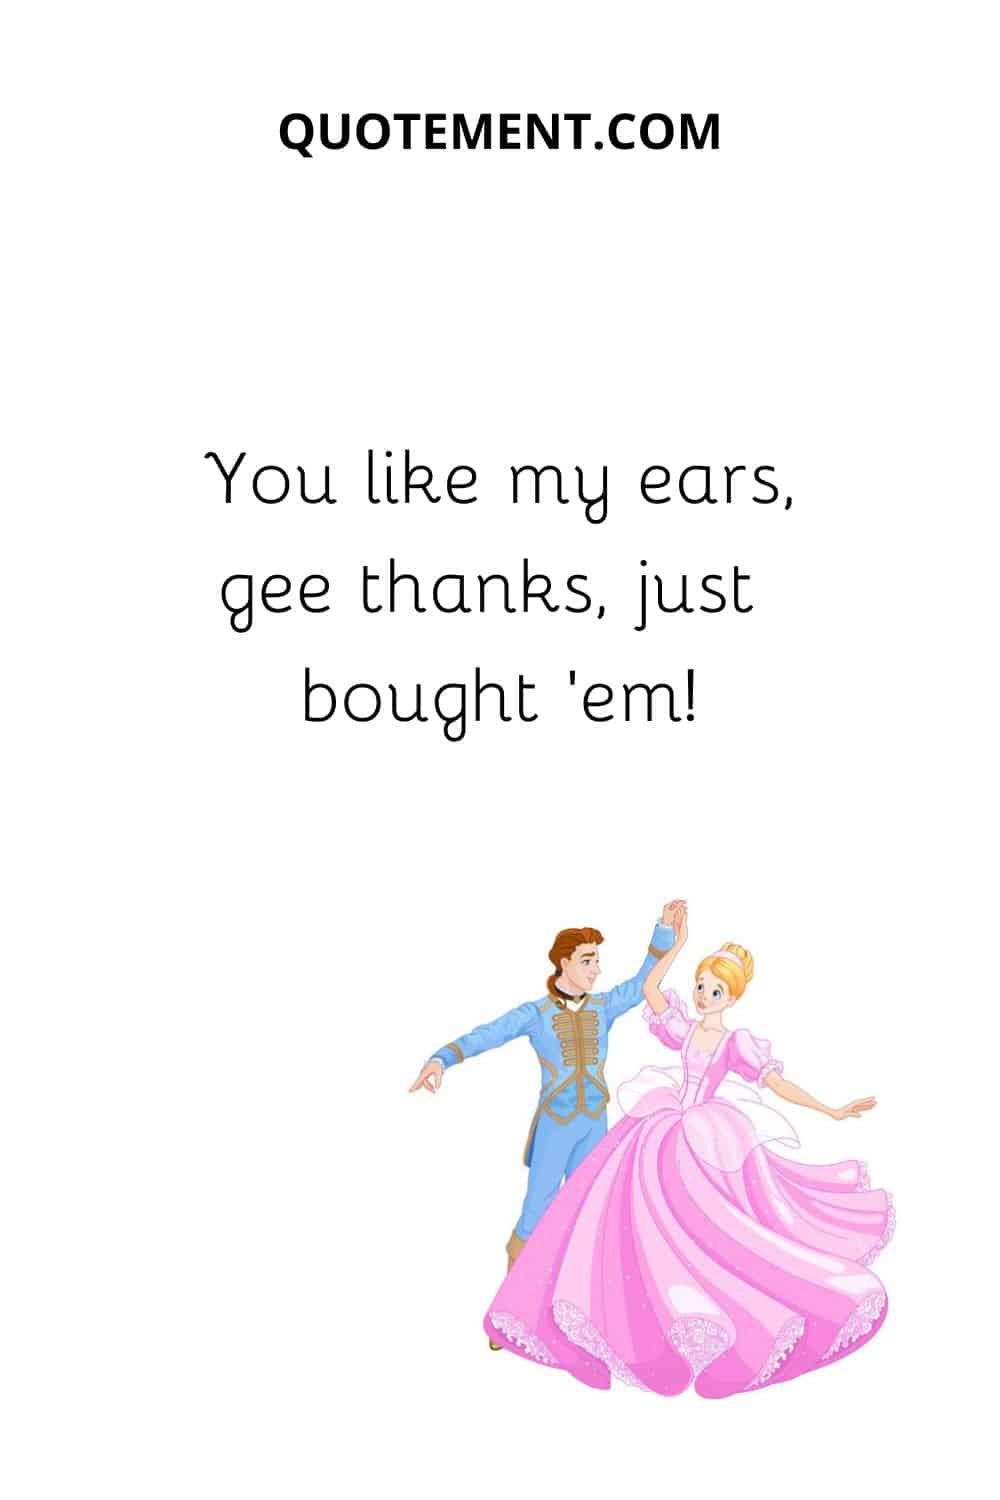 You like my ears, gee thanks, just bought ’em!